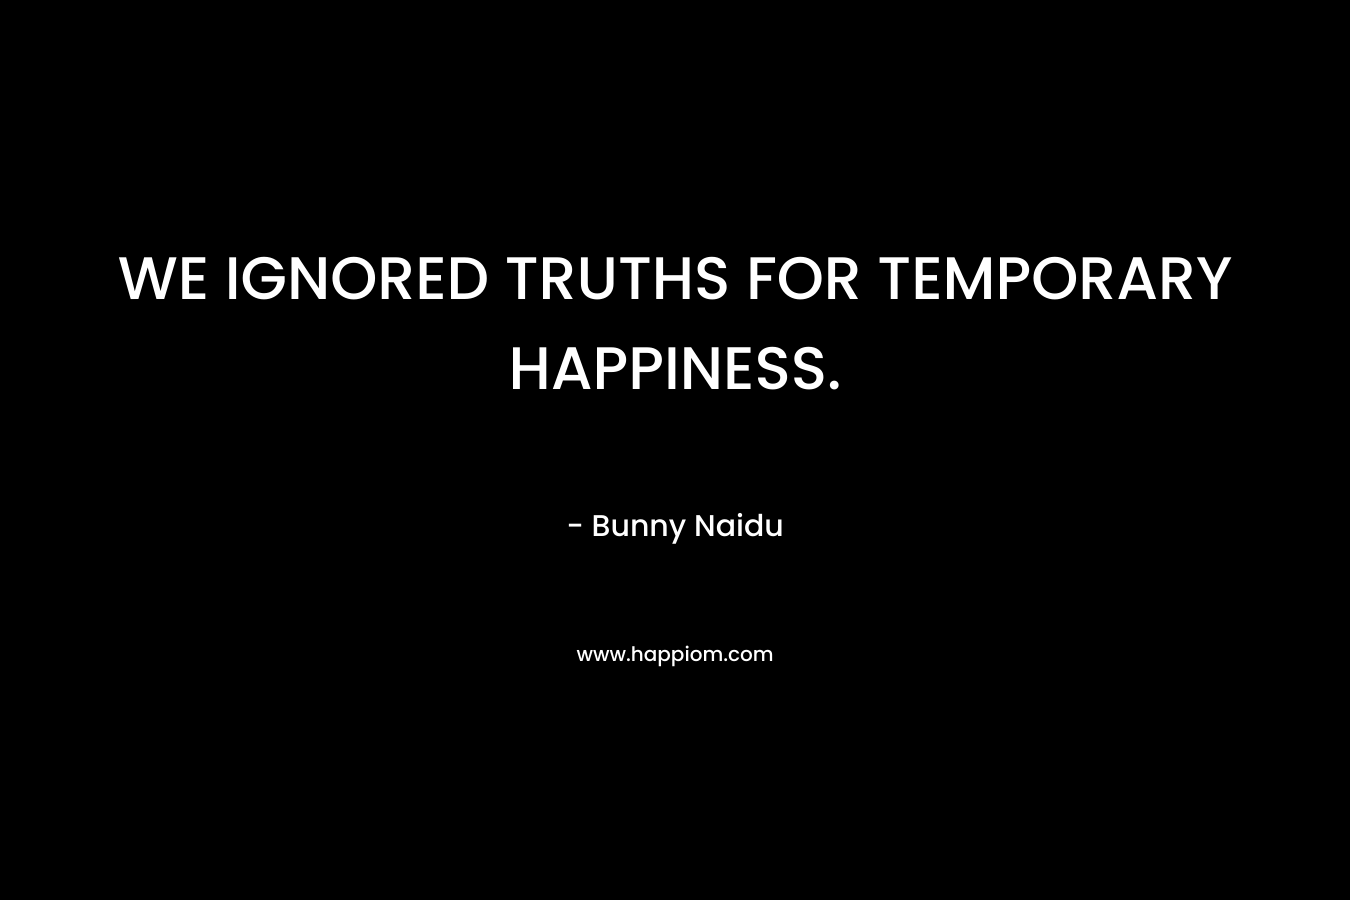 WE IGNORED TRUTHS FOR TEMPORARY HAPPINESS.